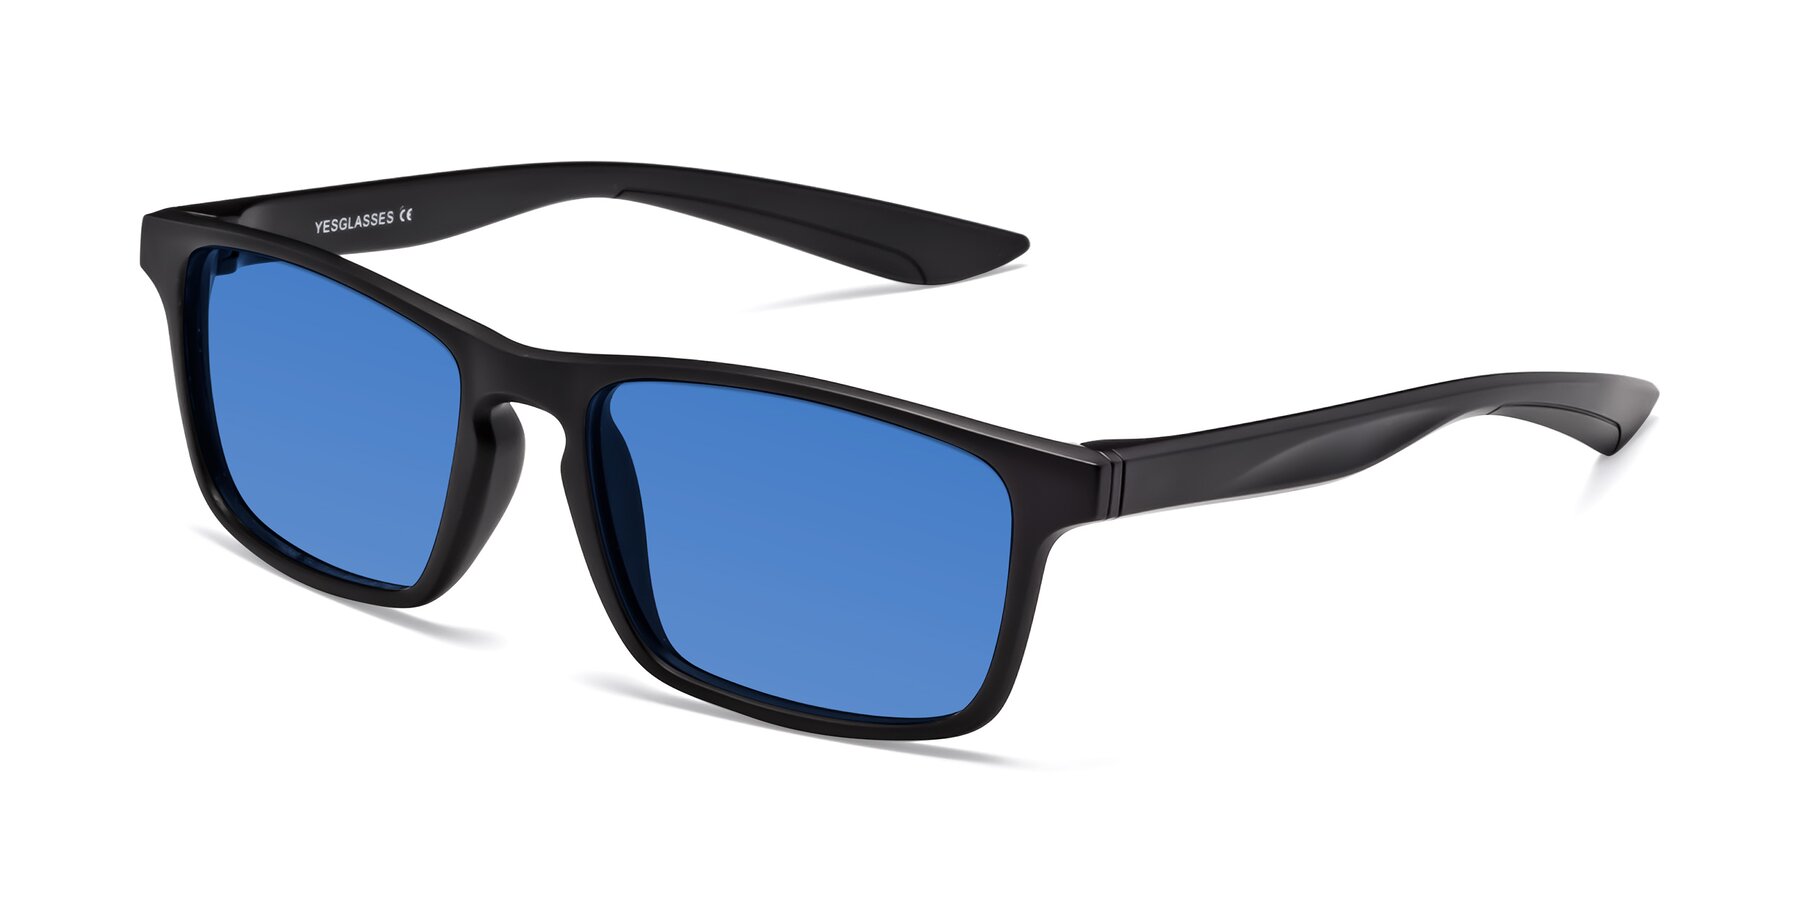 Angle of Passion in Matte Black with Blue Tinted Lenses